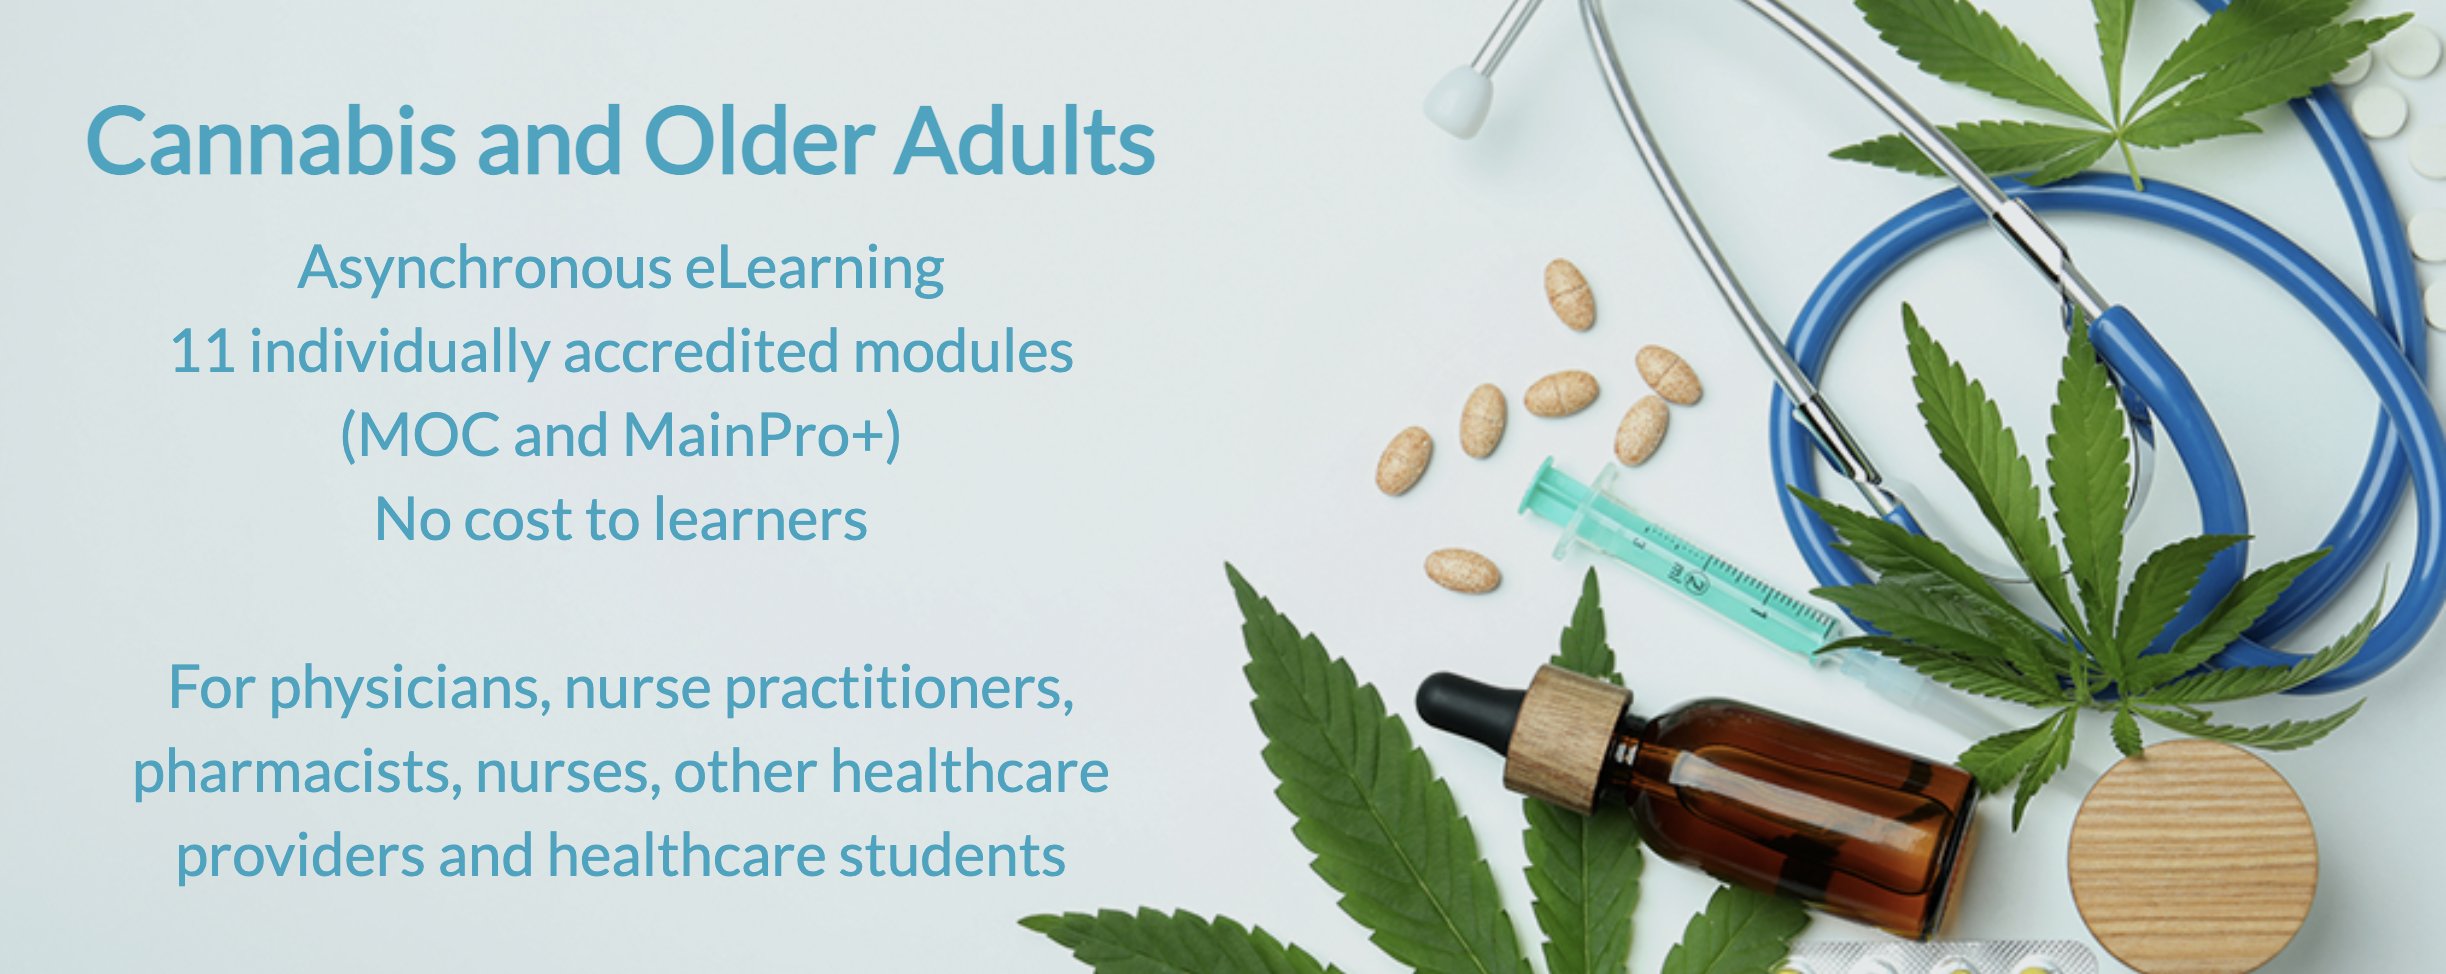 Cannabis_Older_Adults